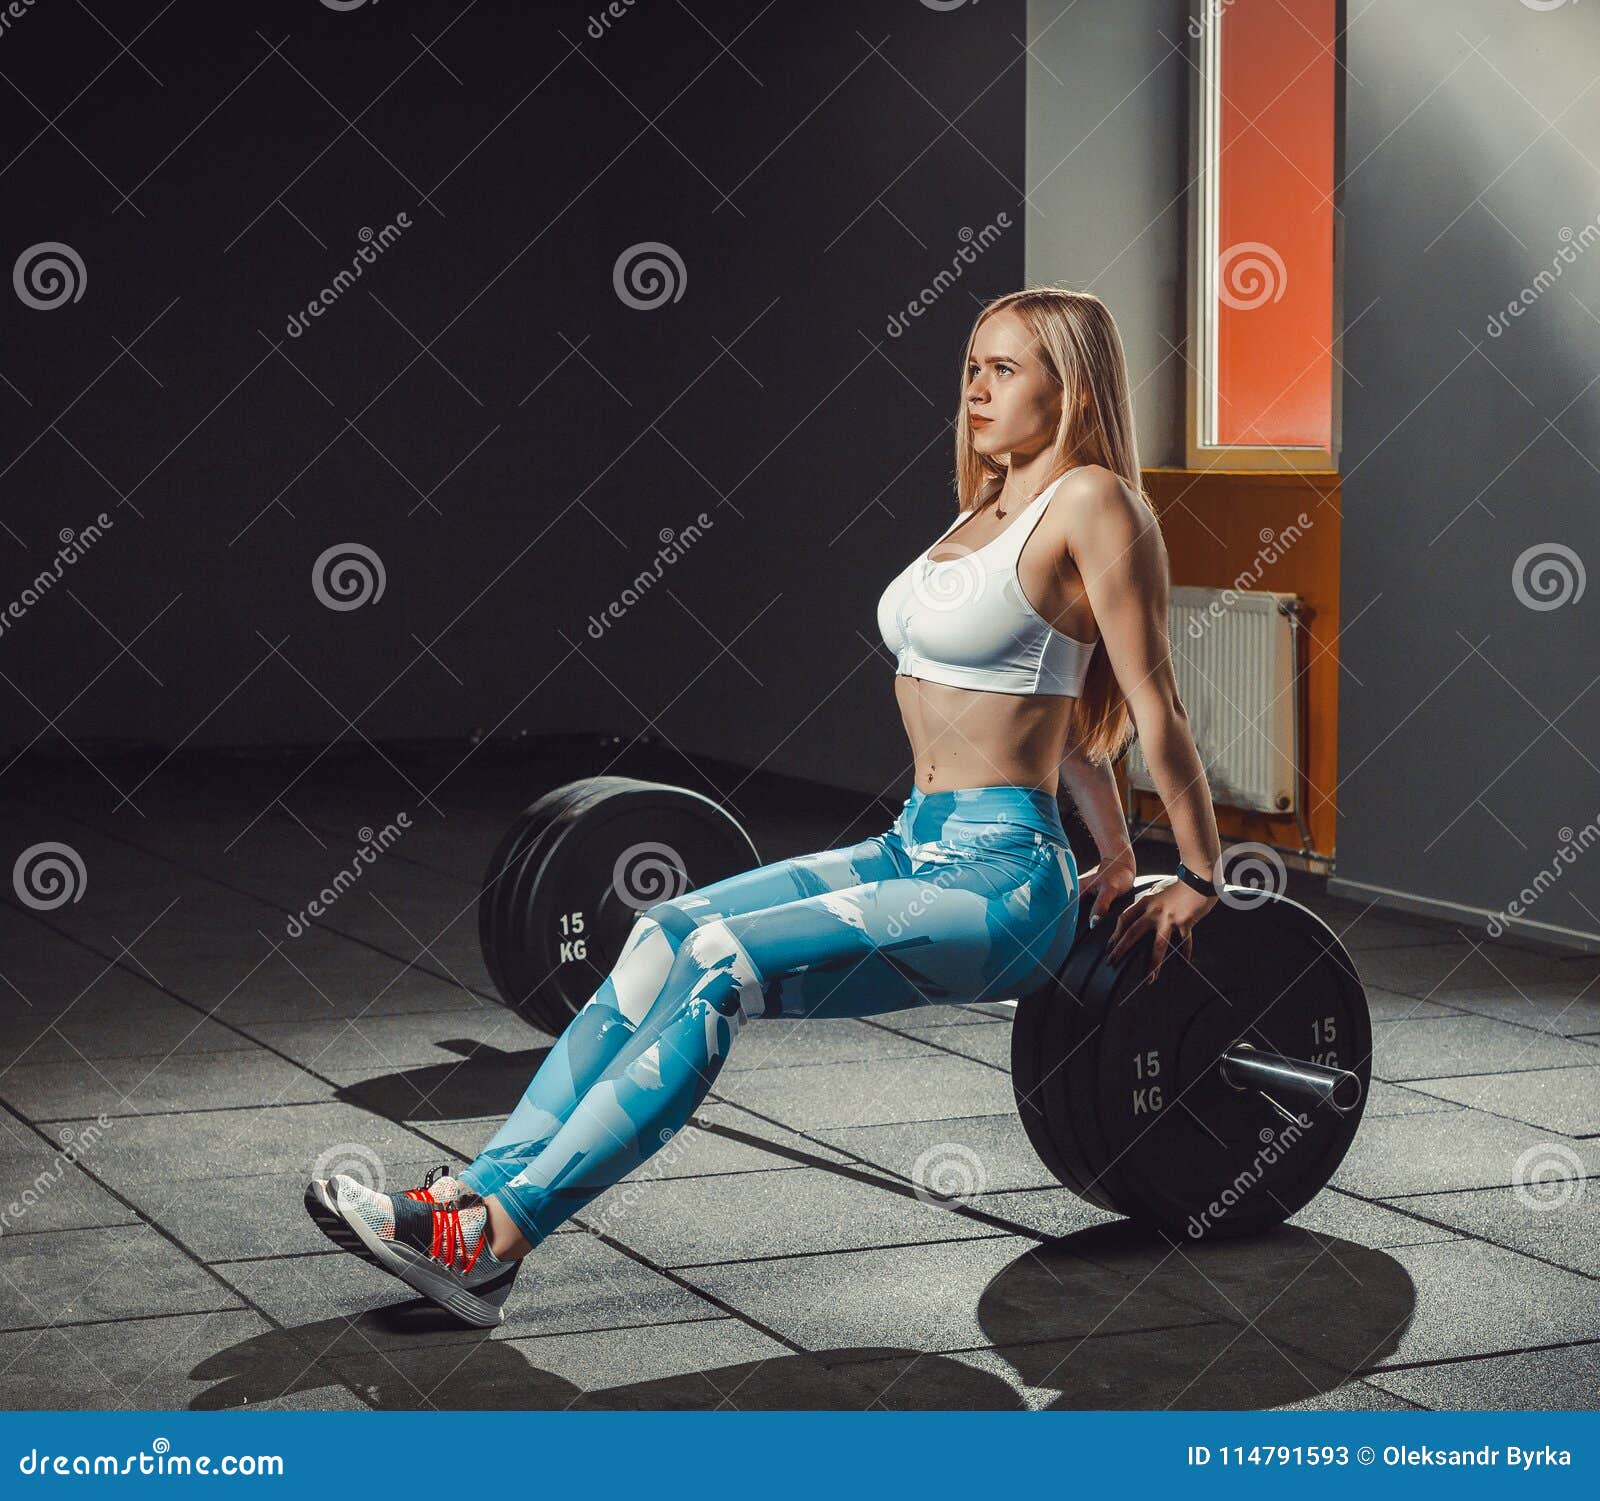 Fitness Girl Athletic Woman Working Out Barbell Gym Beautiful